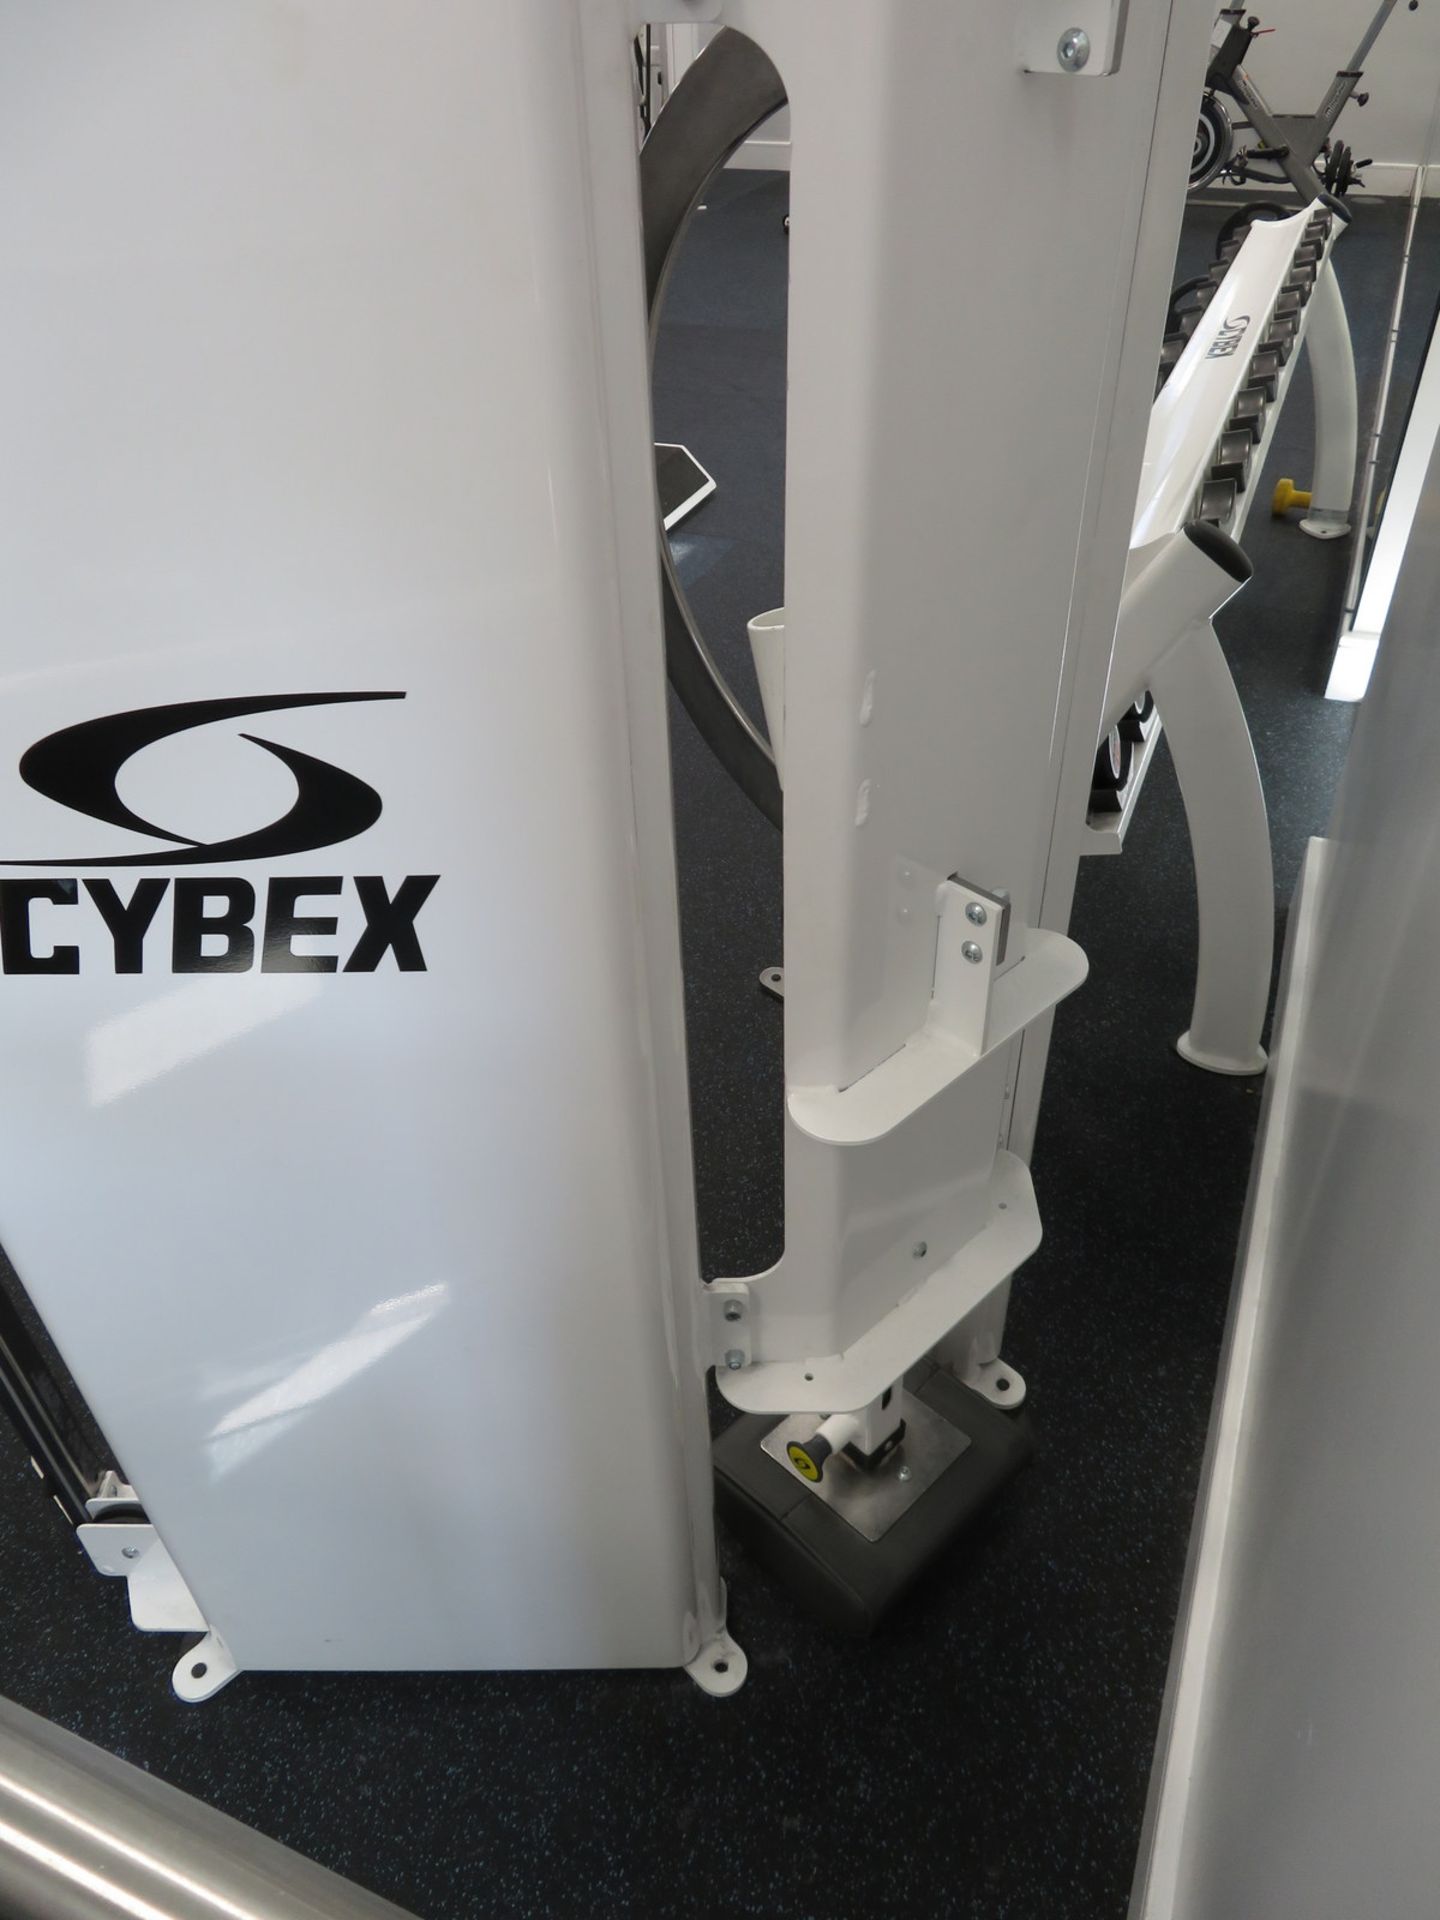 Cybex Bravo (Cable) Model: 8810. 38.6kg Weight Stack. Complete With Attachments. - Image 15 of 16